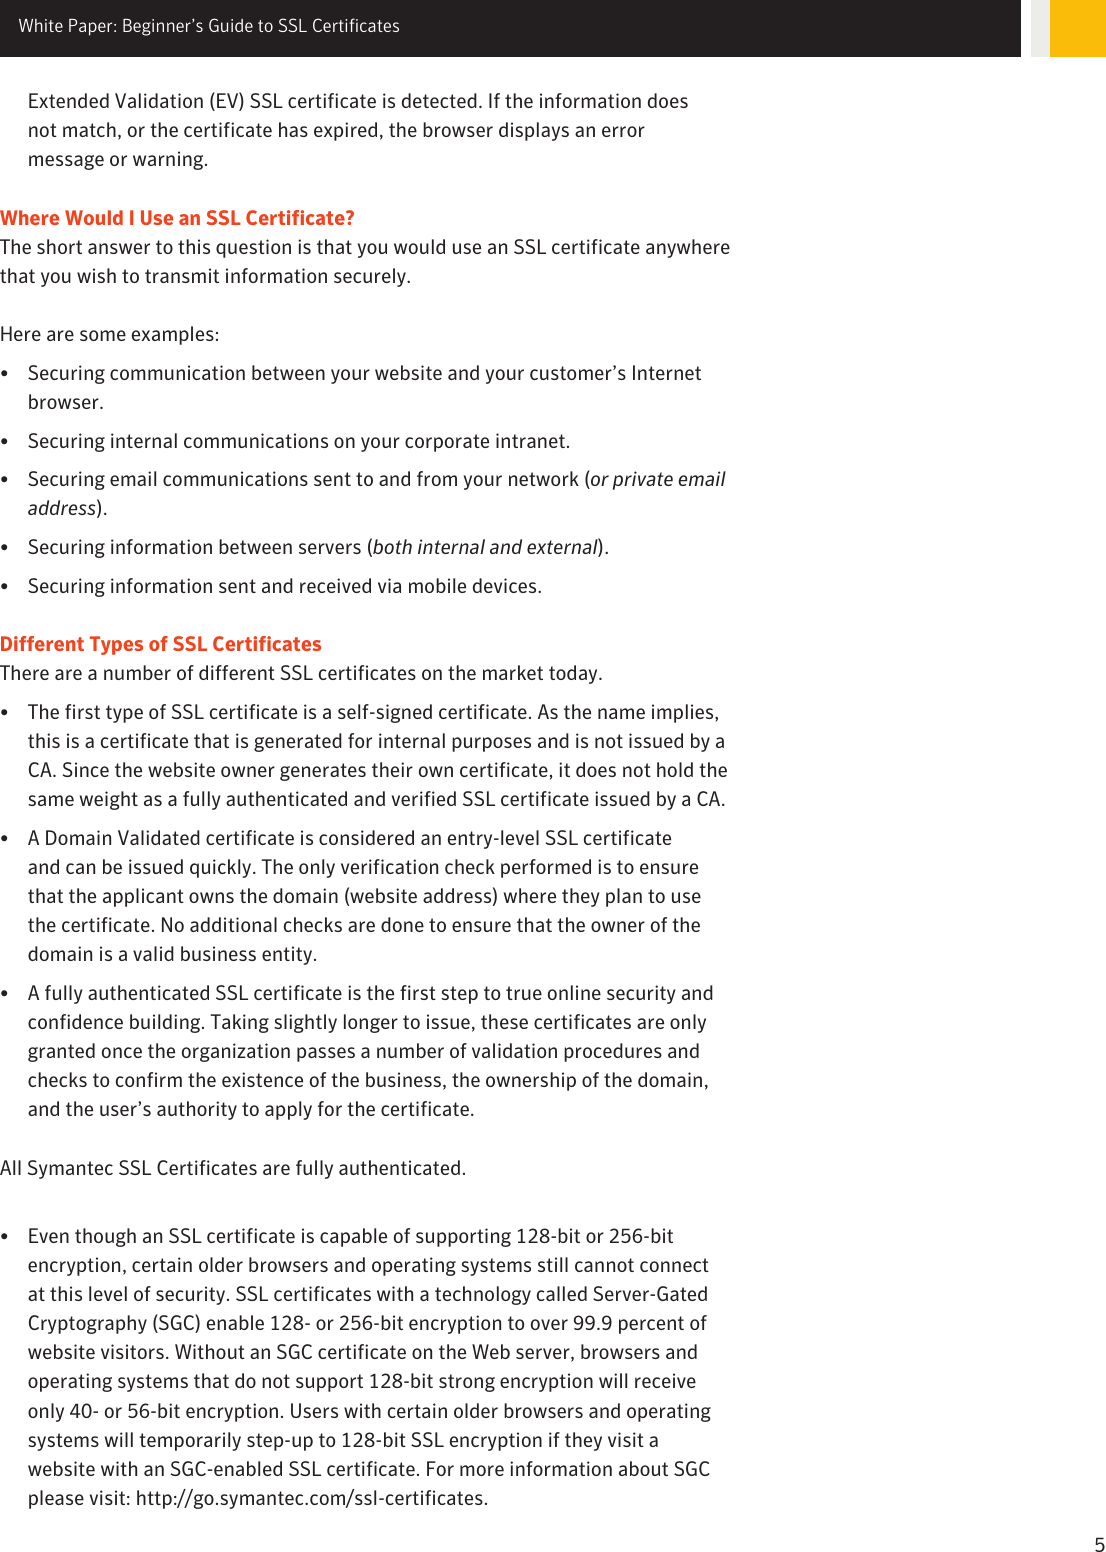 Page 5 of 8 - Beginners-guide-to-ssl-certificates